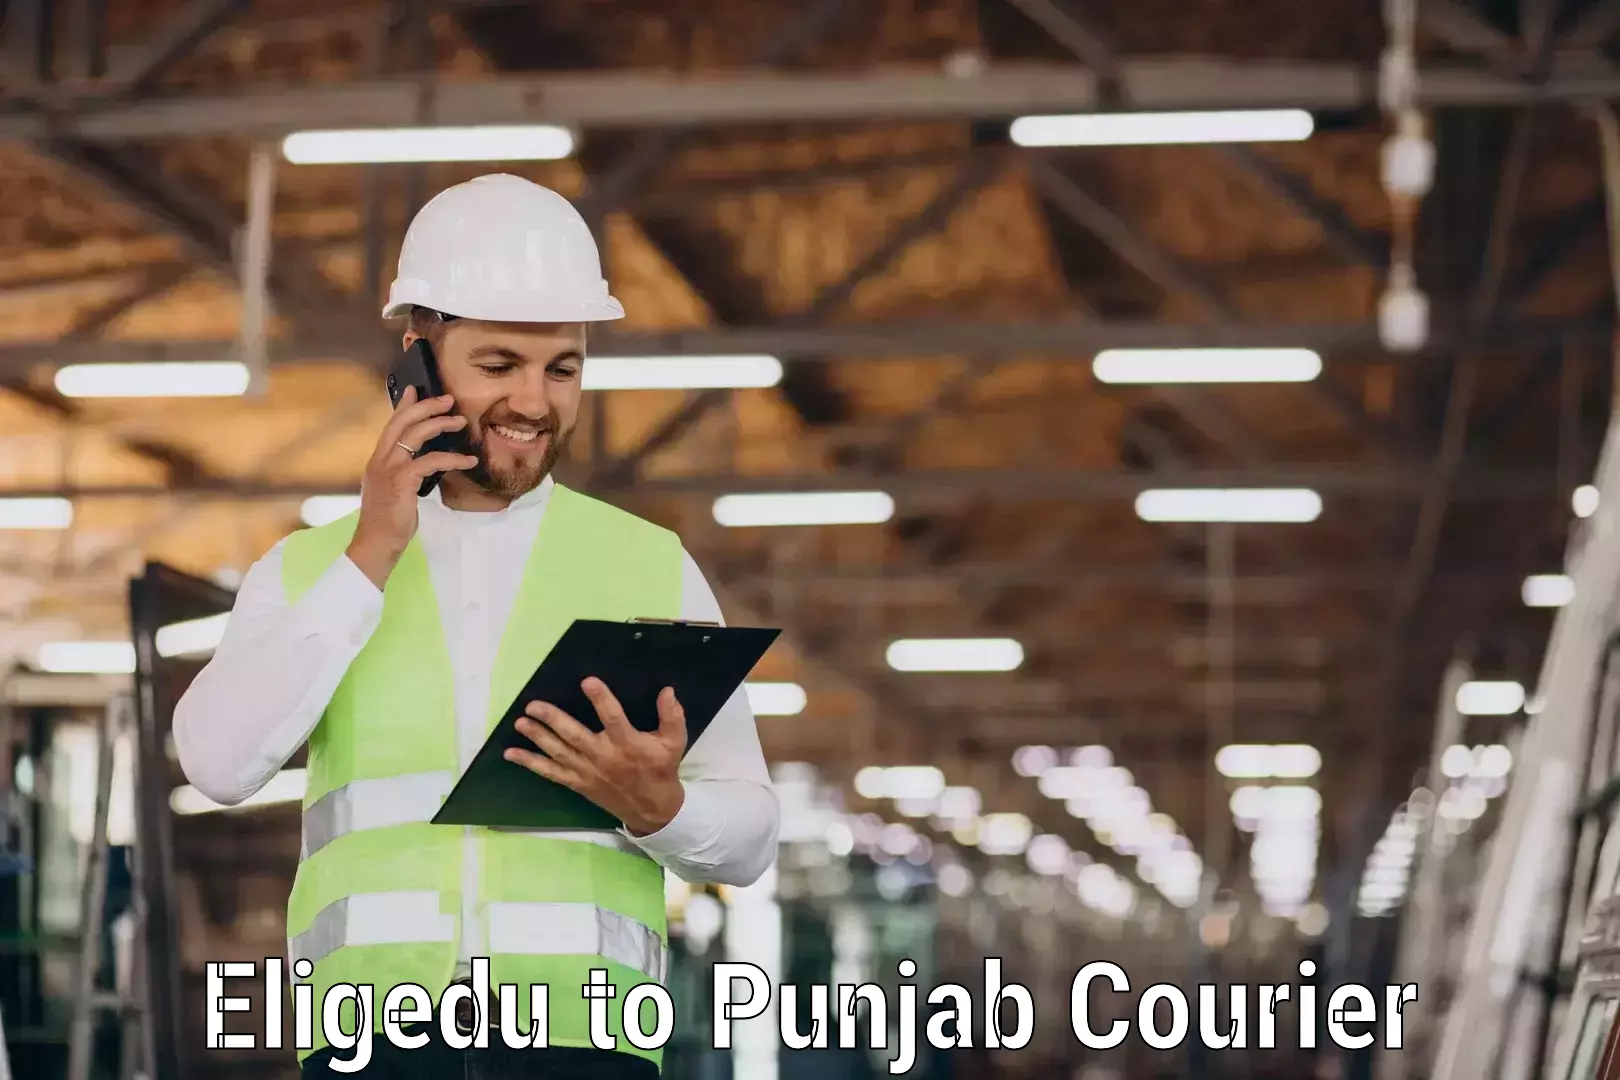 Business courier solutions Eligedu to Central University of Punjab Bathinda